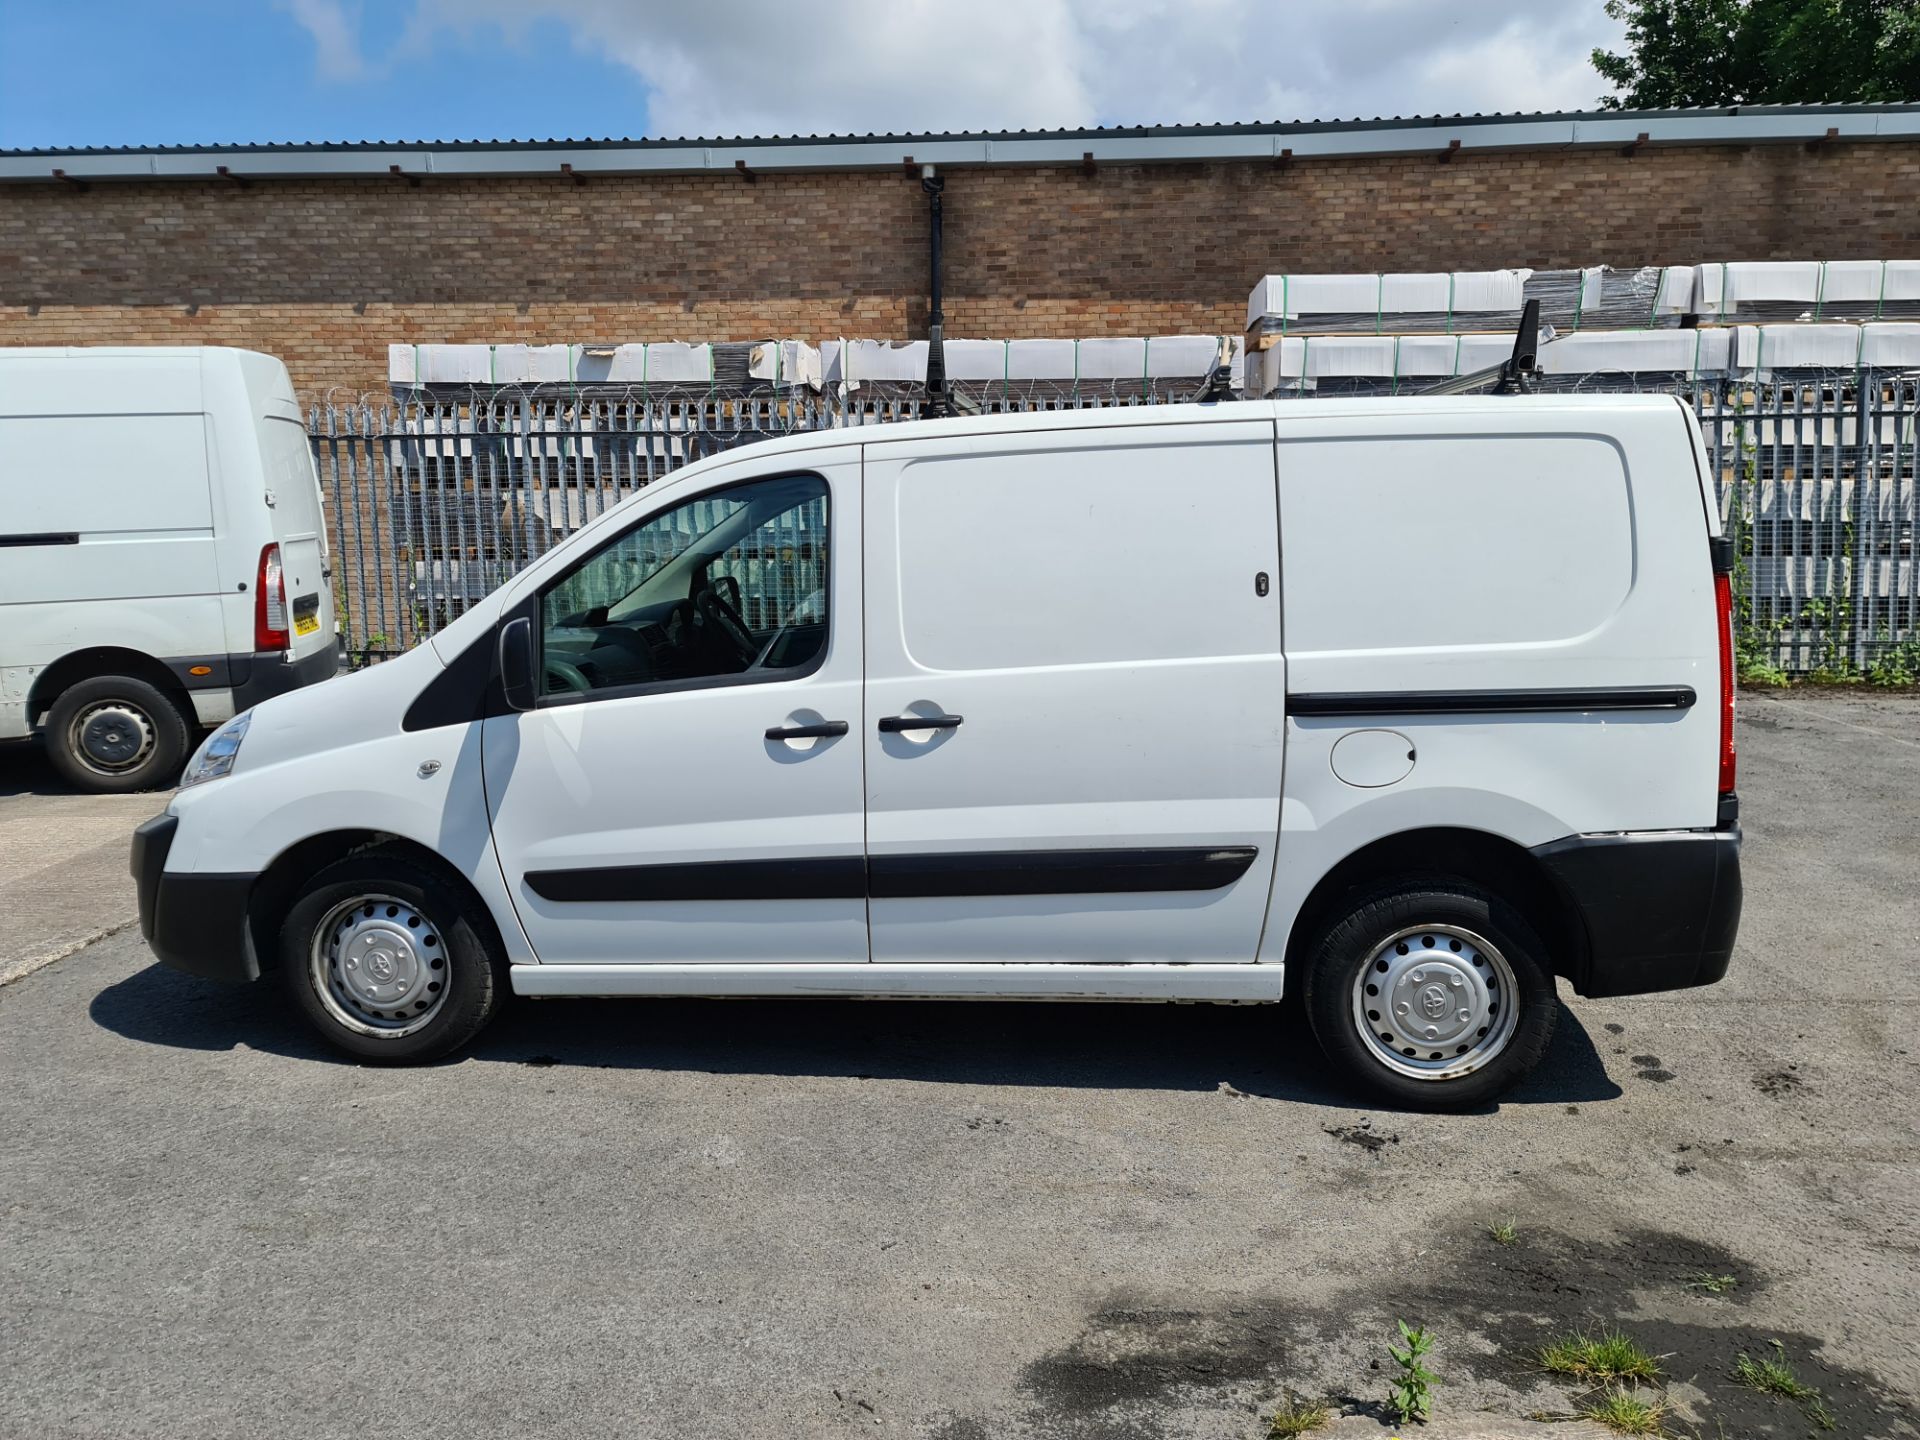 2015 Toyota Proace 1200 L1H1 HDi panel van - Image 8 of 42